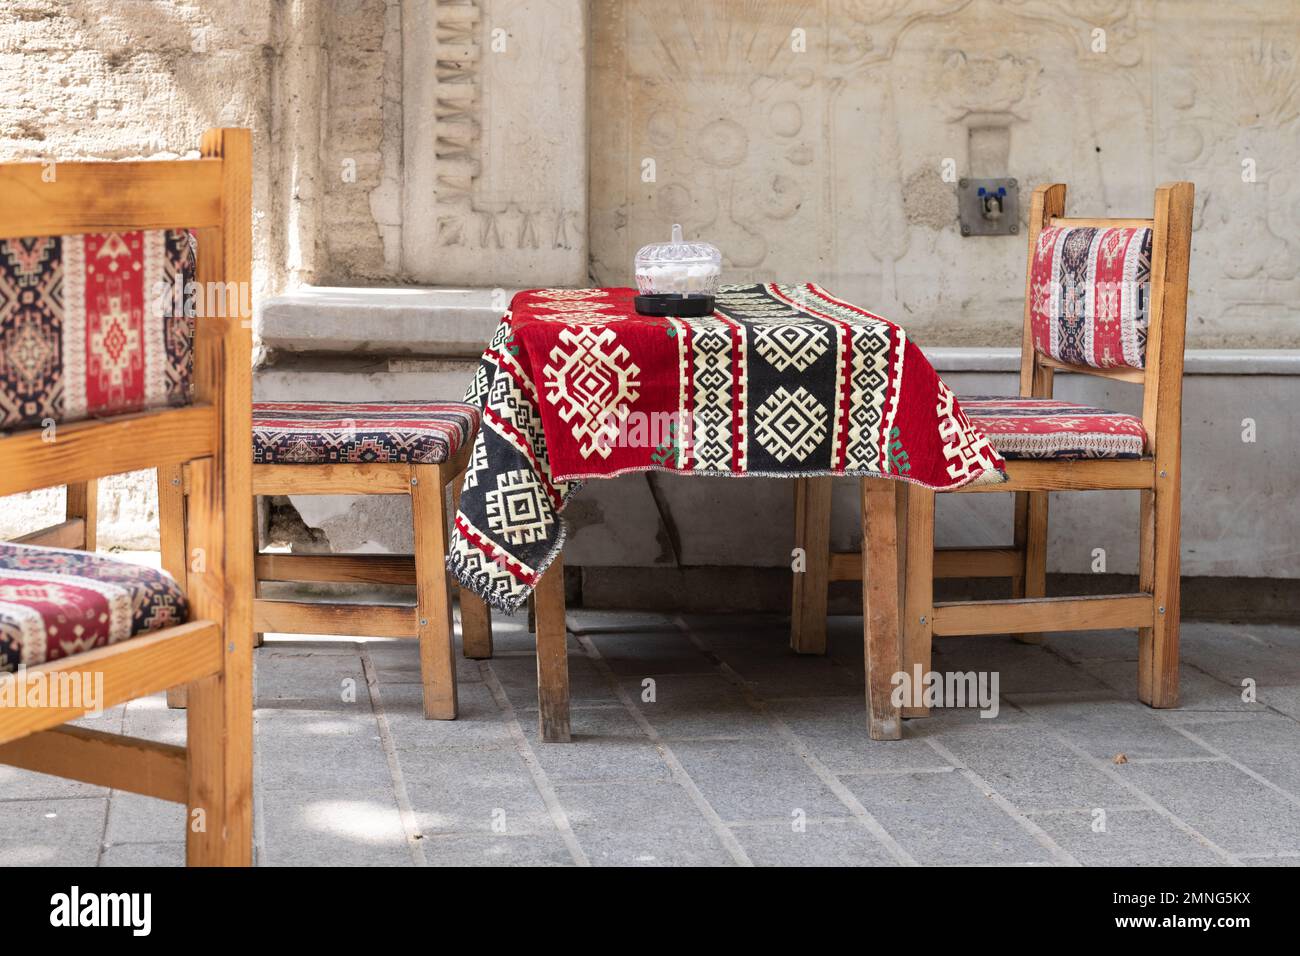 Kilim fabric textile tablecloth and chairs outside cafe, Istanbul, Turkey Stock Photo